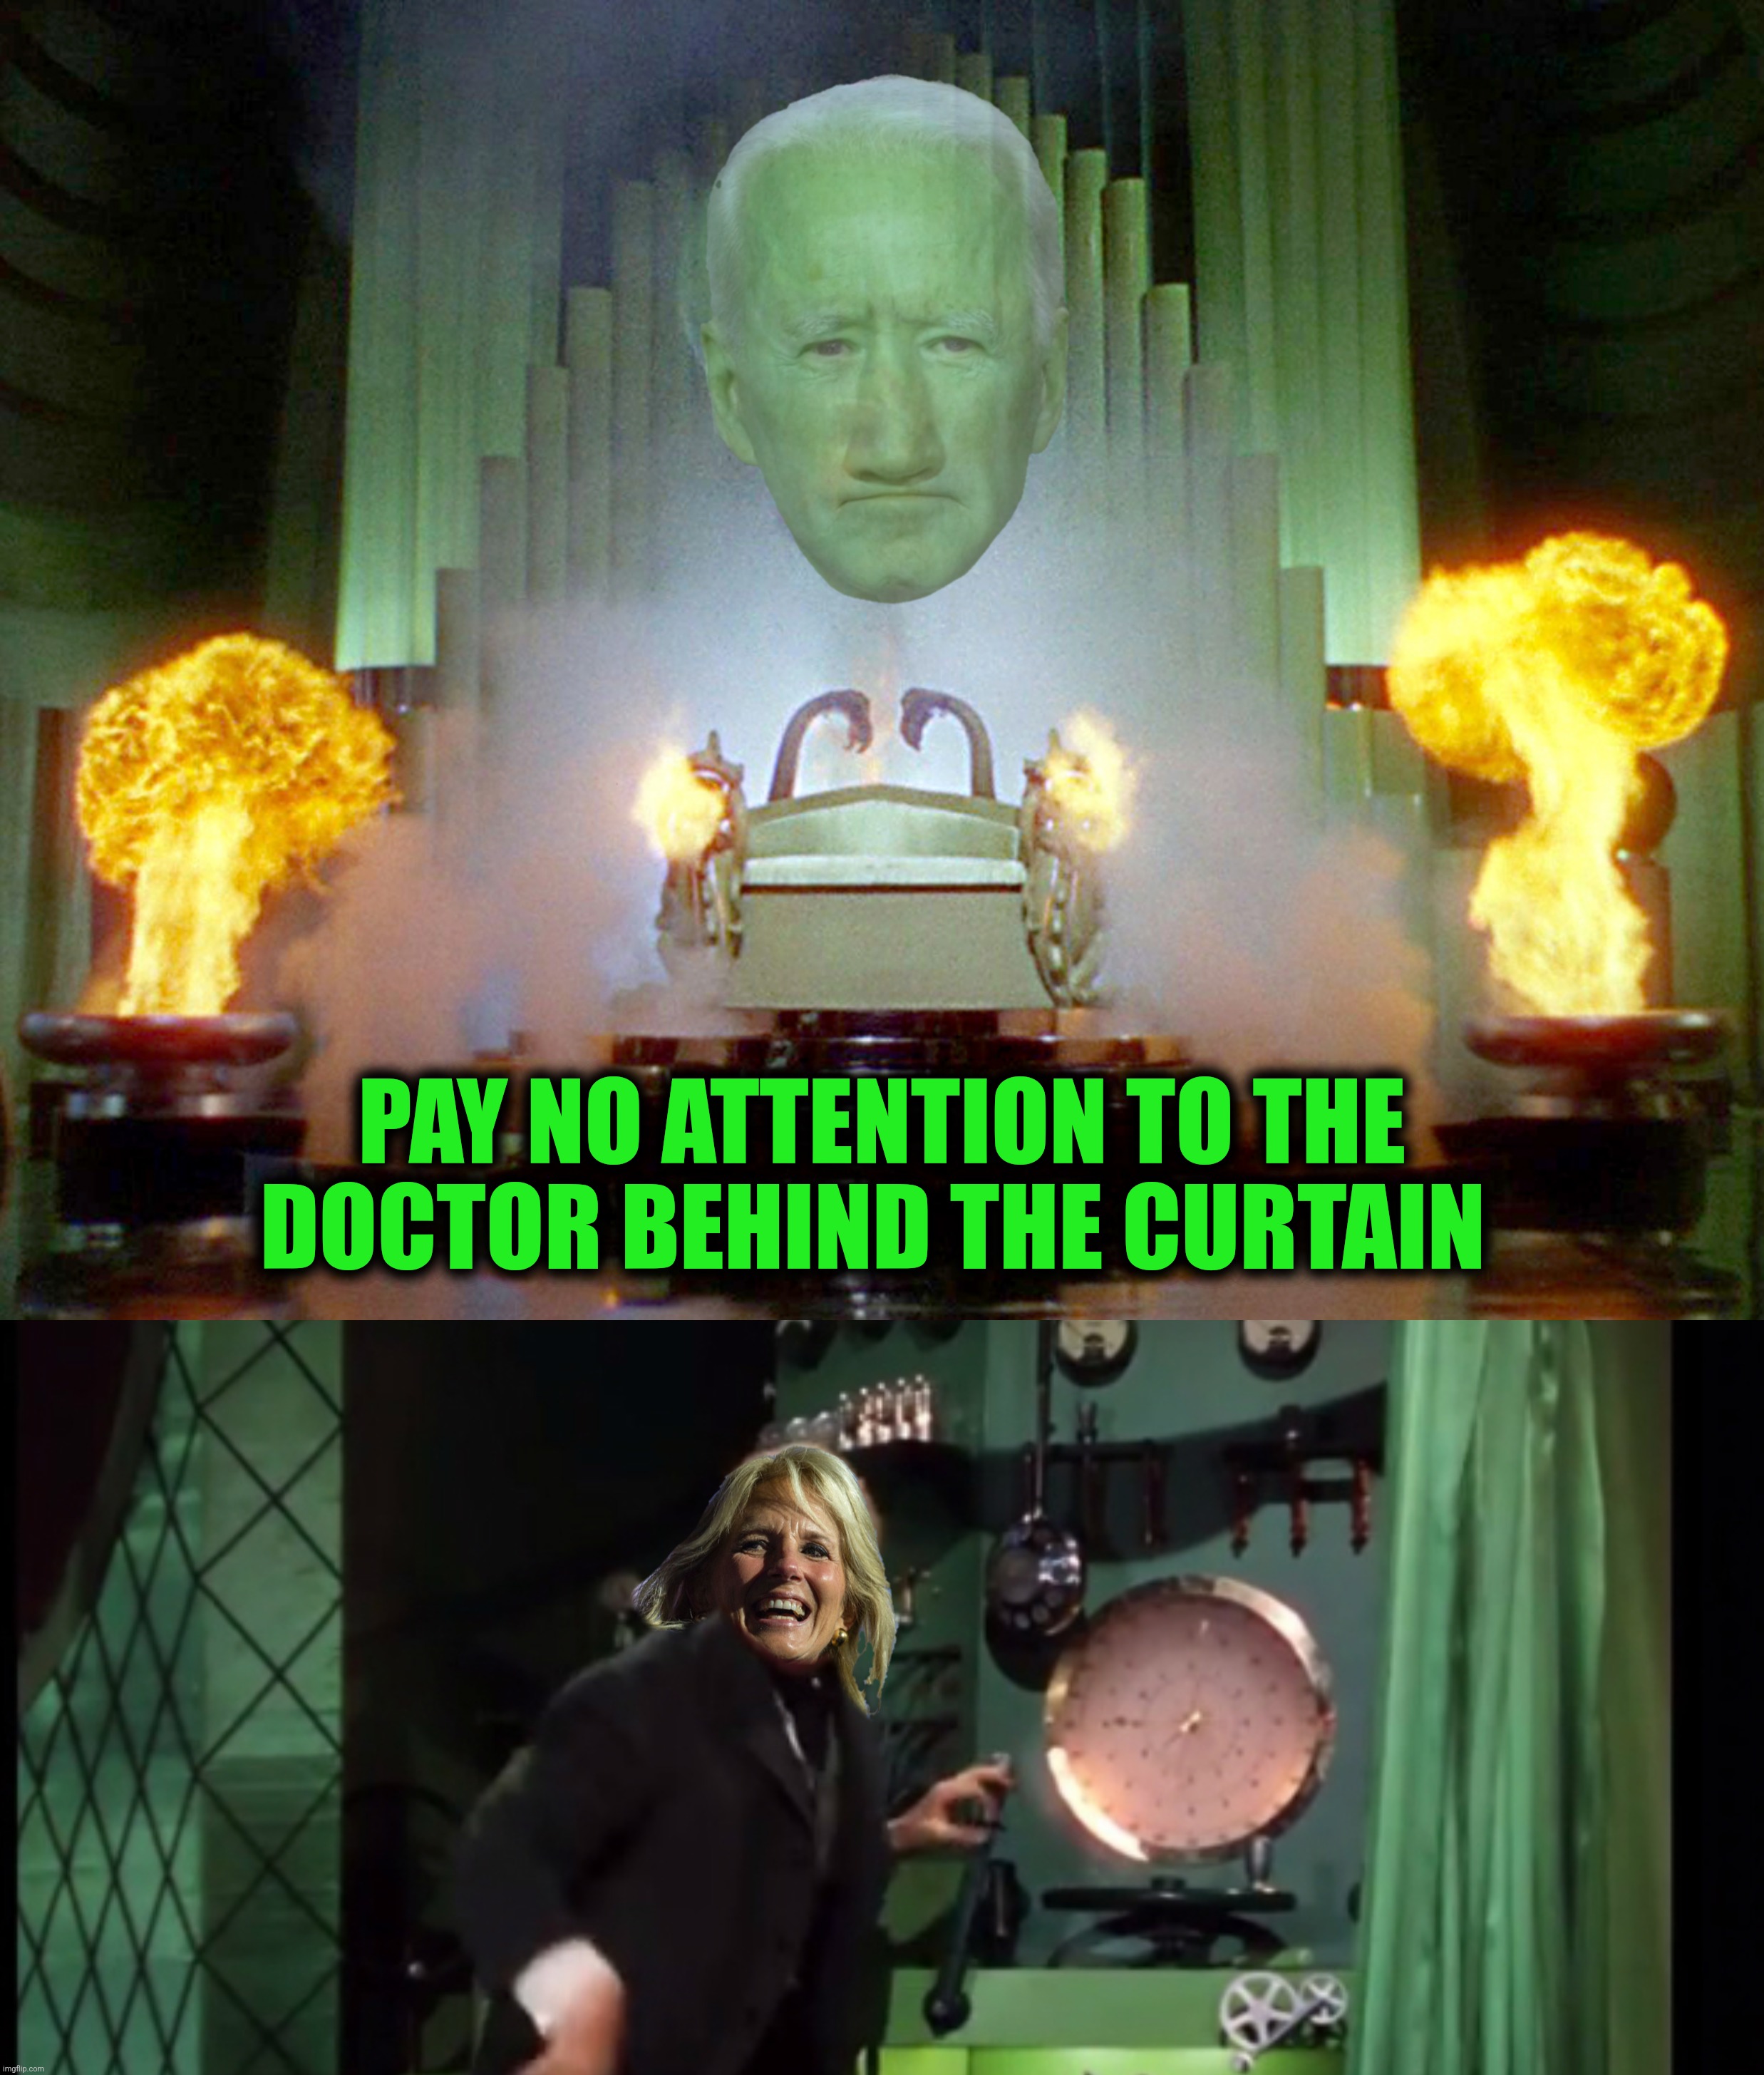 PAY NO ATTENTION TO THE DOCTOR BEHIND THE CURTAIN | made w/ Imgflip meme maker